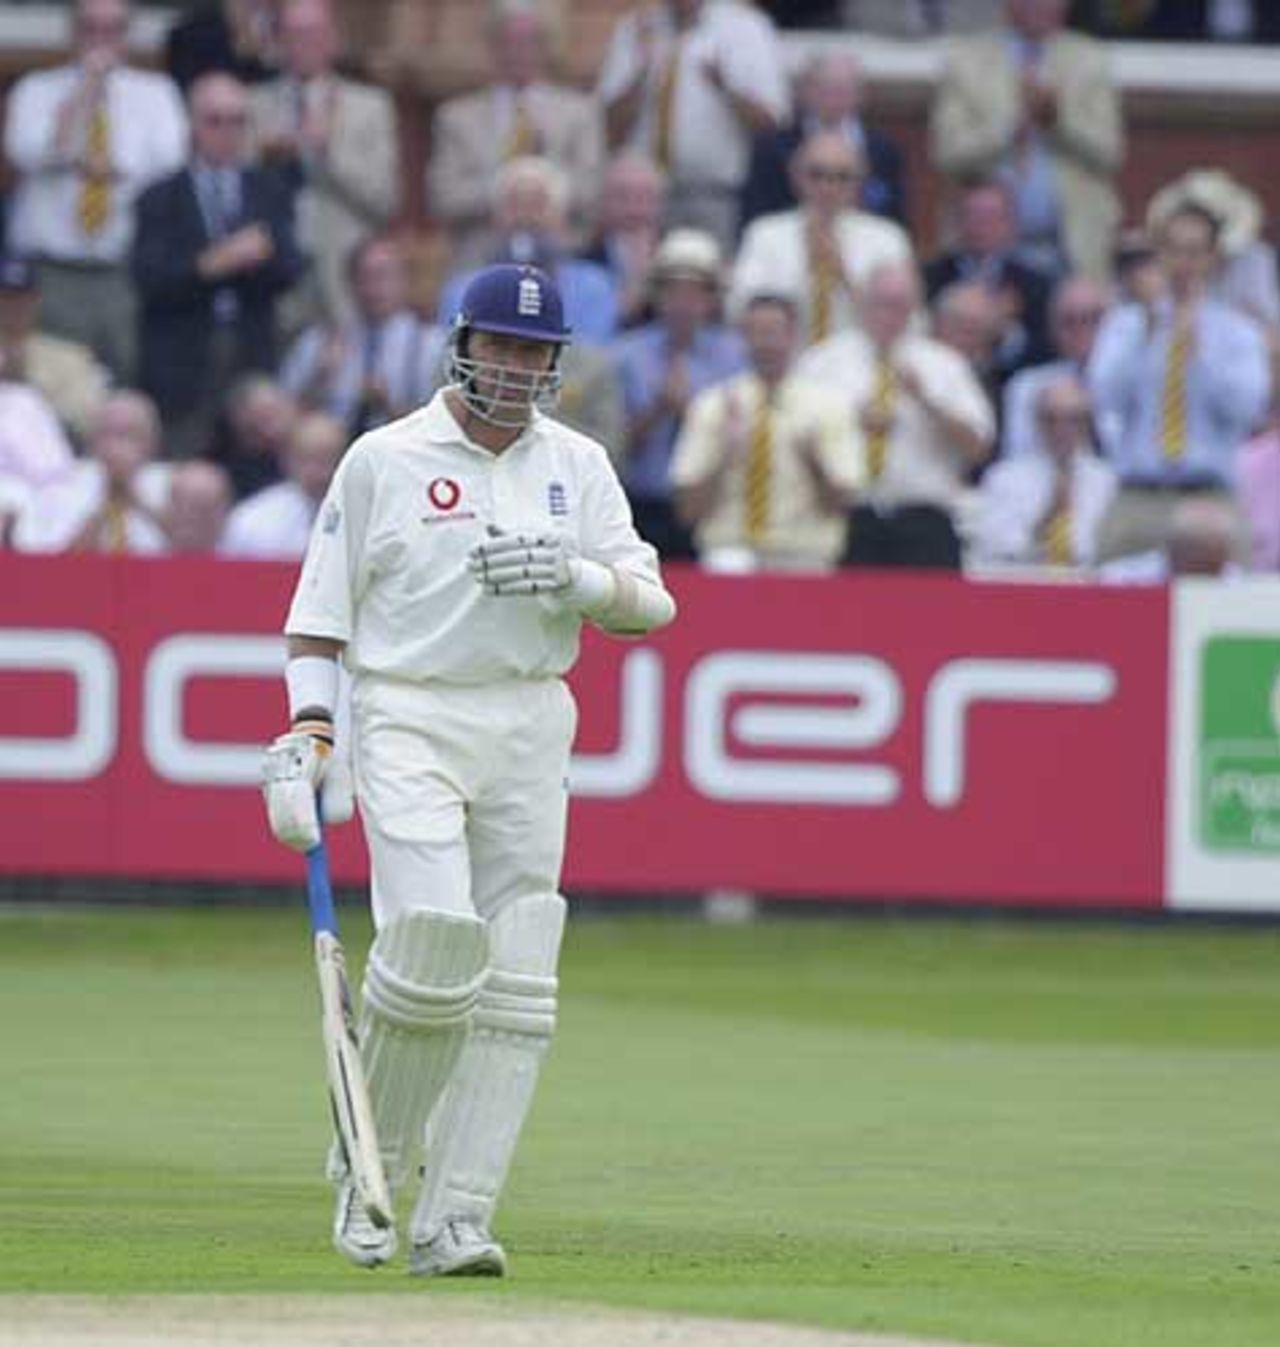 Alec Stewart receives a standing ovation as he comes out to bat for in his 119th Test for England, a new record, England v India, 1st npower Test at Lord's